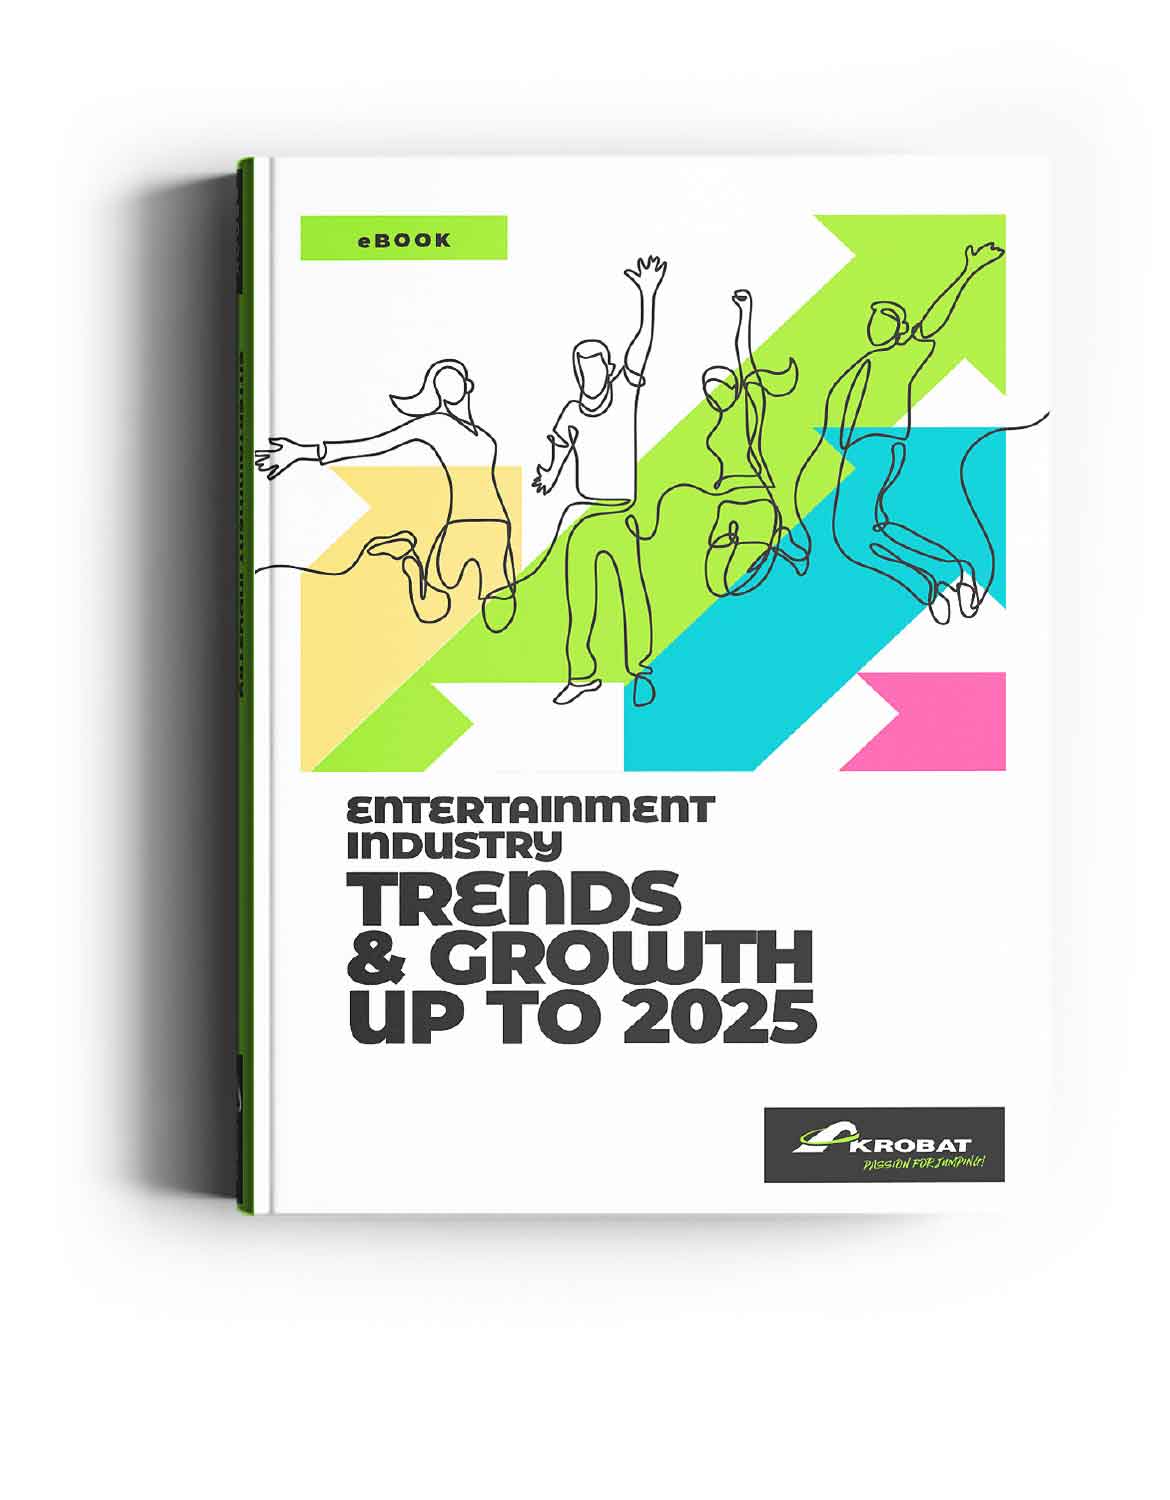 Entertainment Industry: Trends up to 2025 / Akrobat